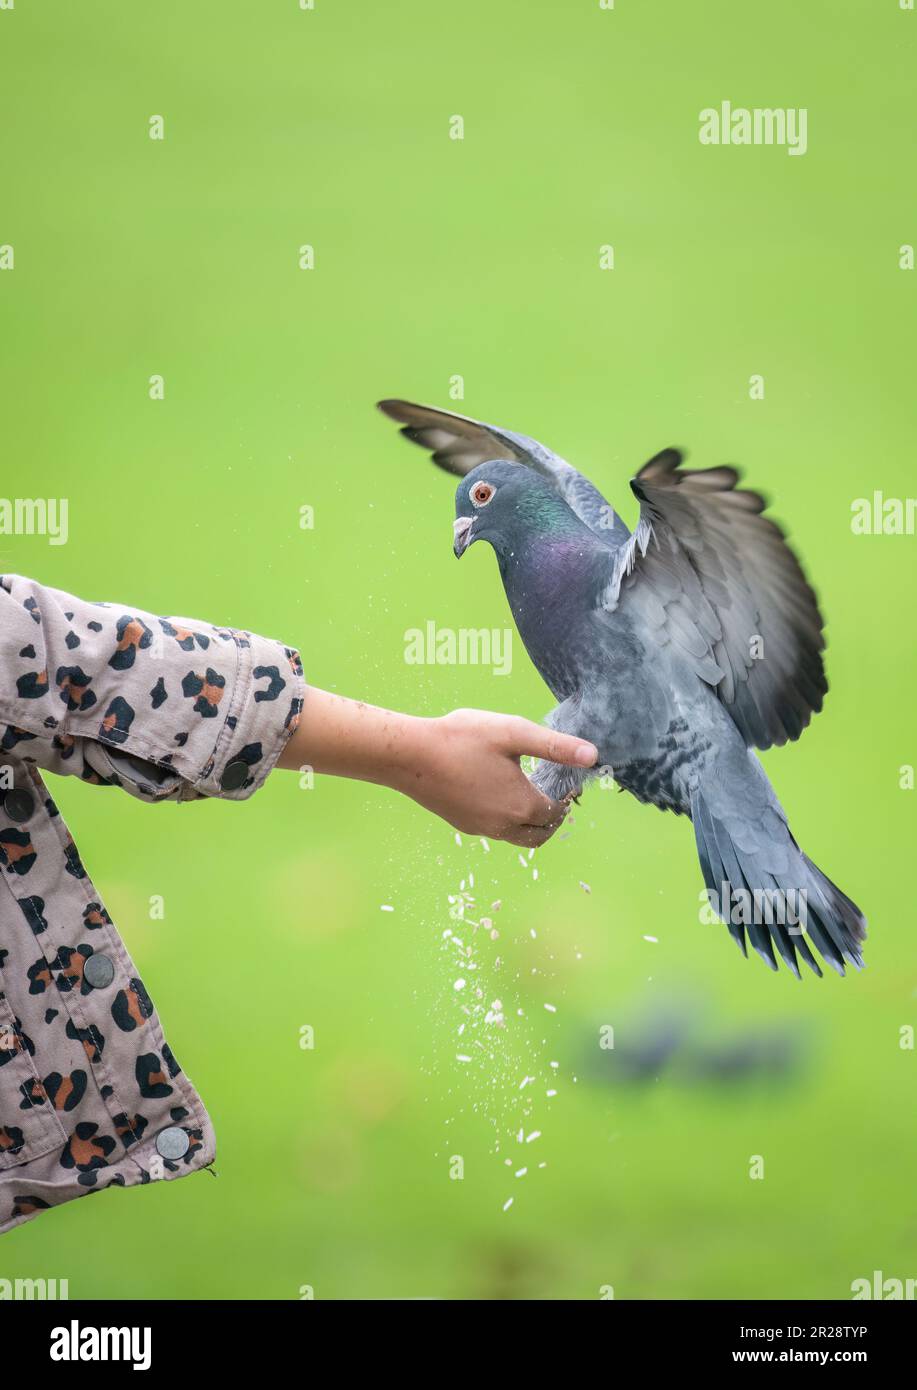 Pigeon flying landing to catch the food offered by a girl. Western Springs Park. Auckland. Vertical format. Stock Photo